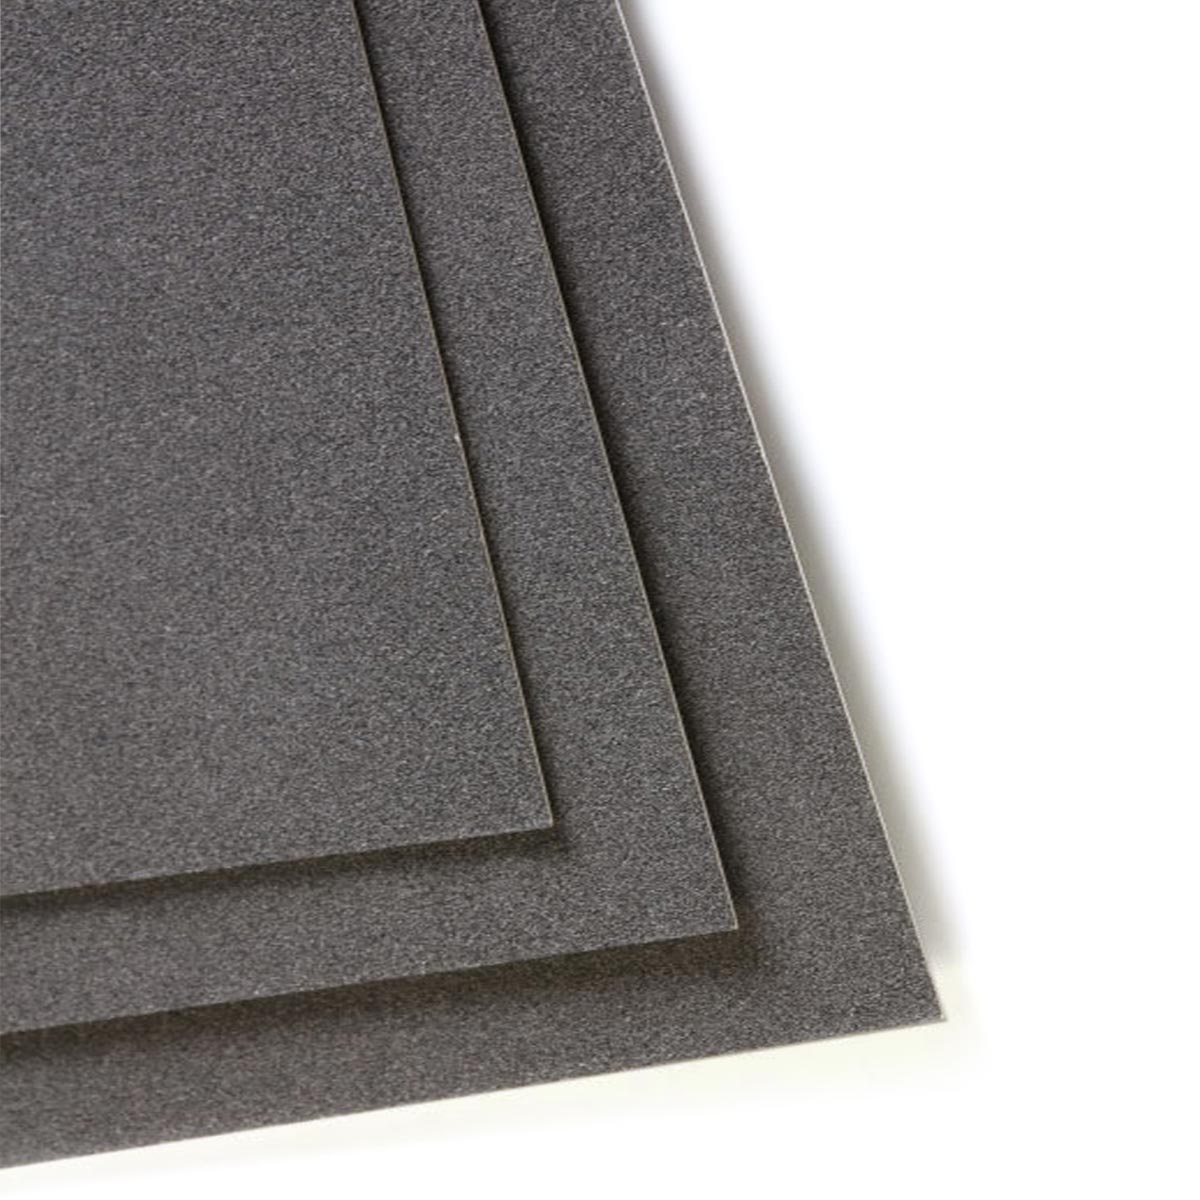 Clairefontaine Pastelmat Mounted Board - Charcoal Grey 19.5 x 27.5 in (50x70cm)